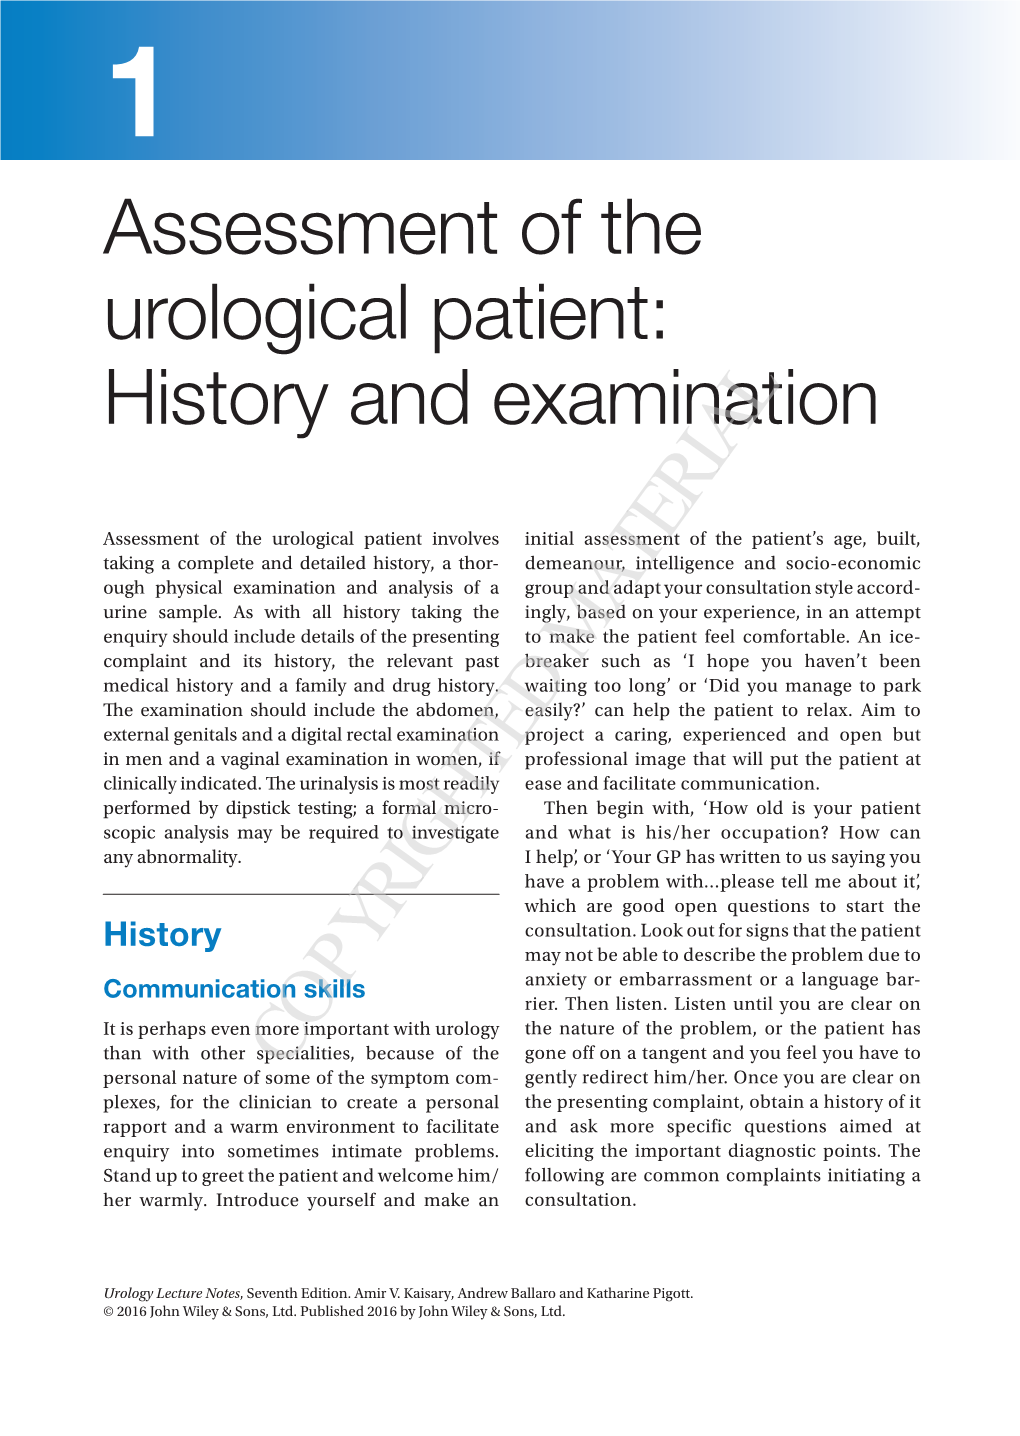 Assessment of the Urological Patient : History and Examination